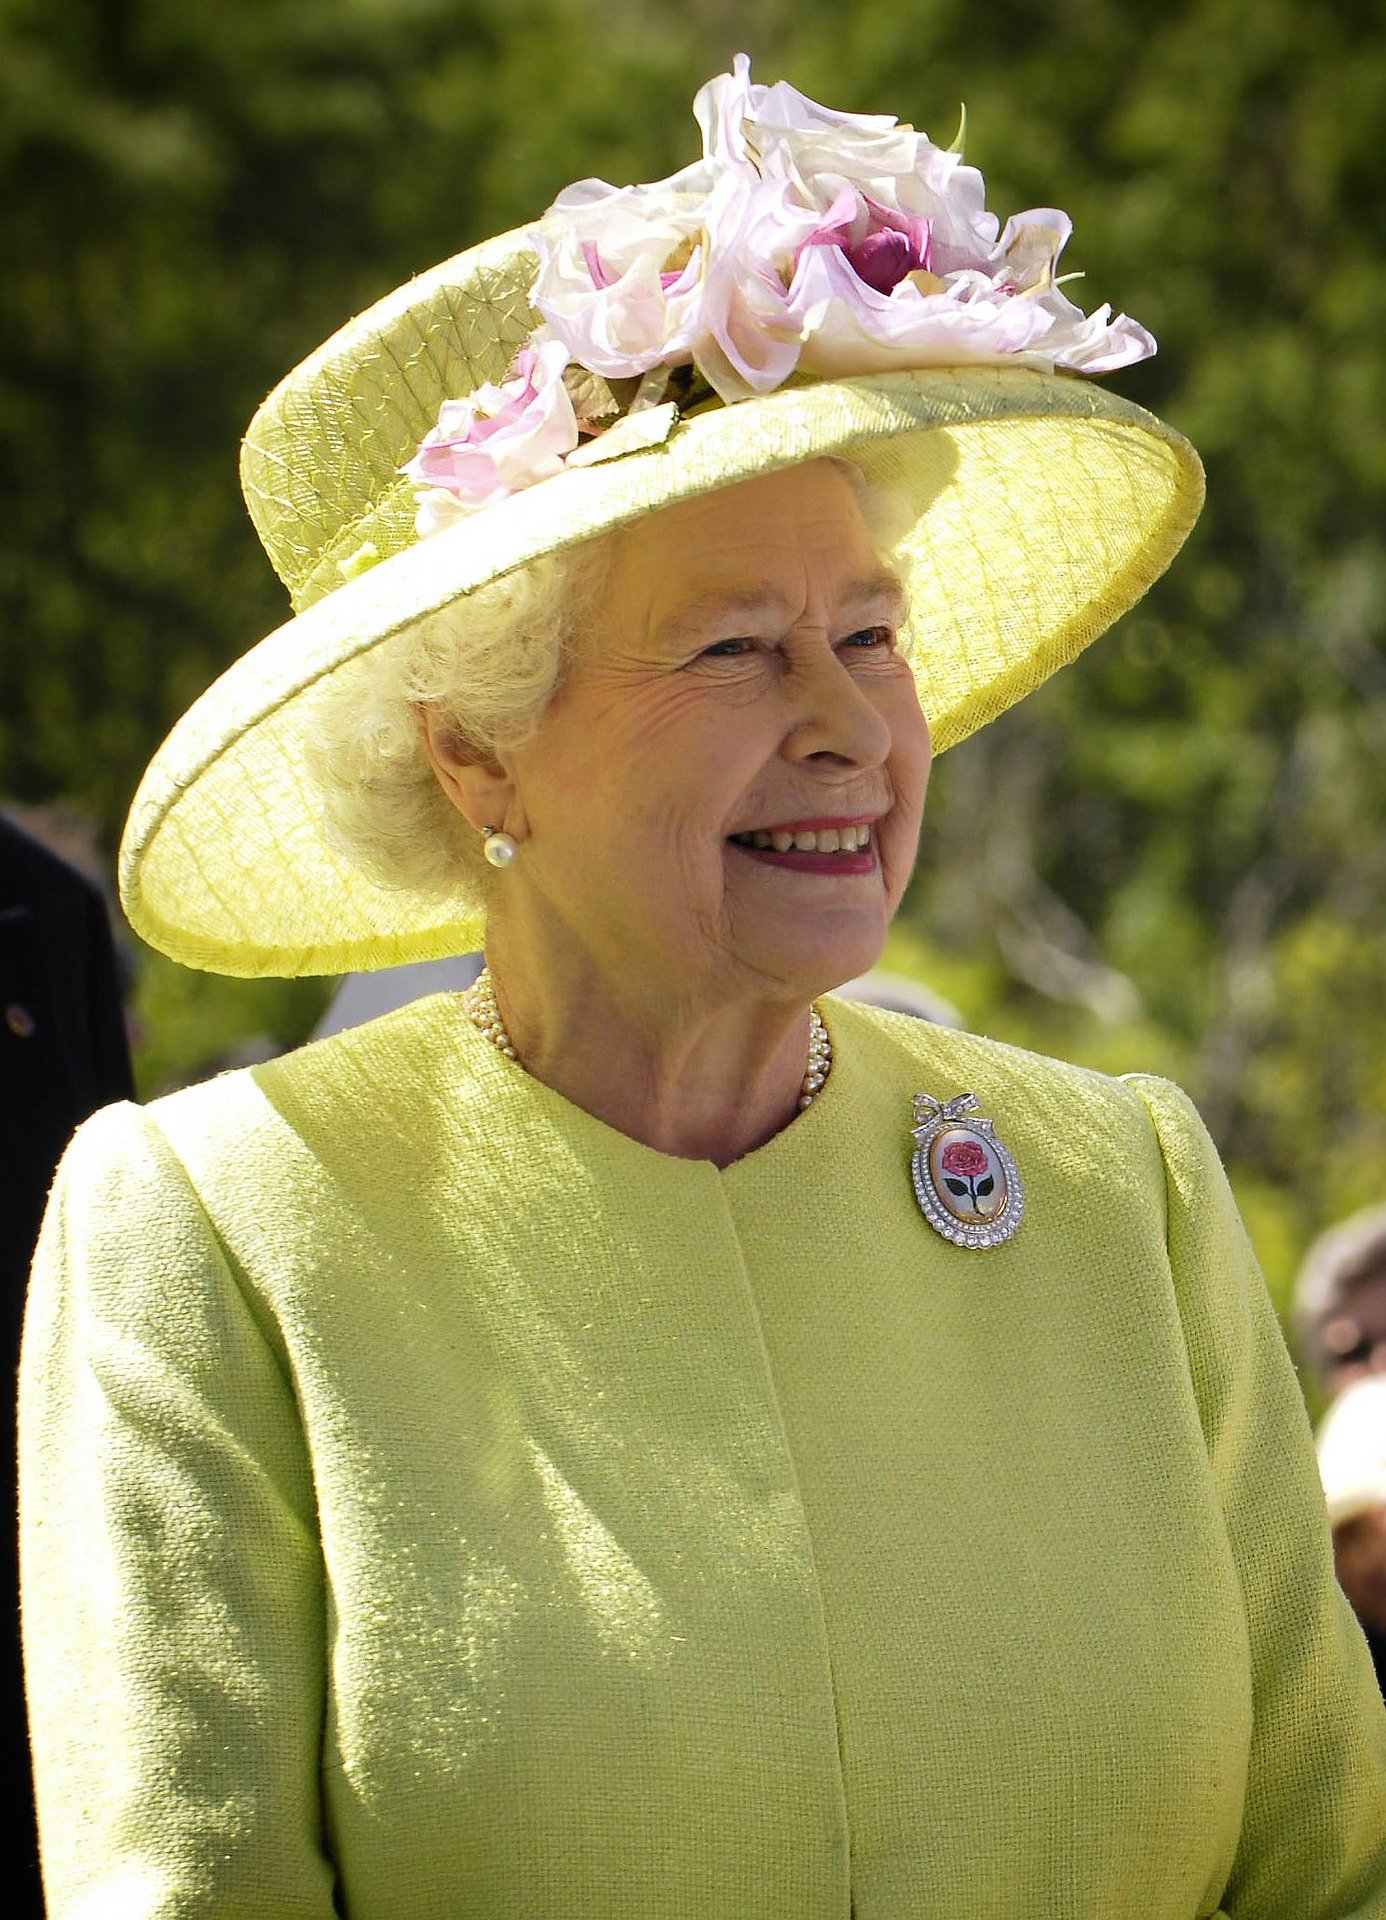 Which countries are ruled by the Queen of England?